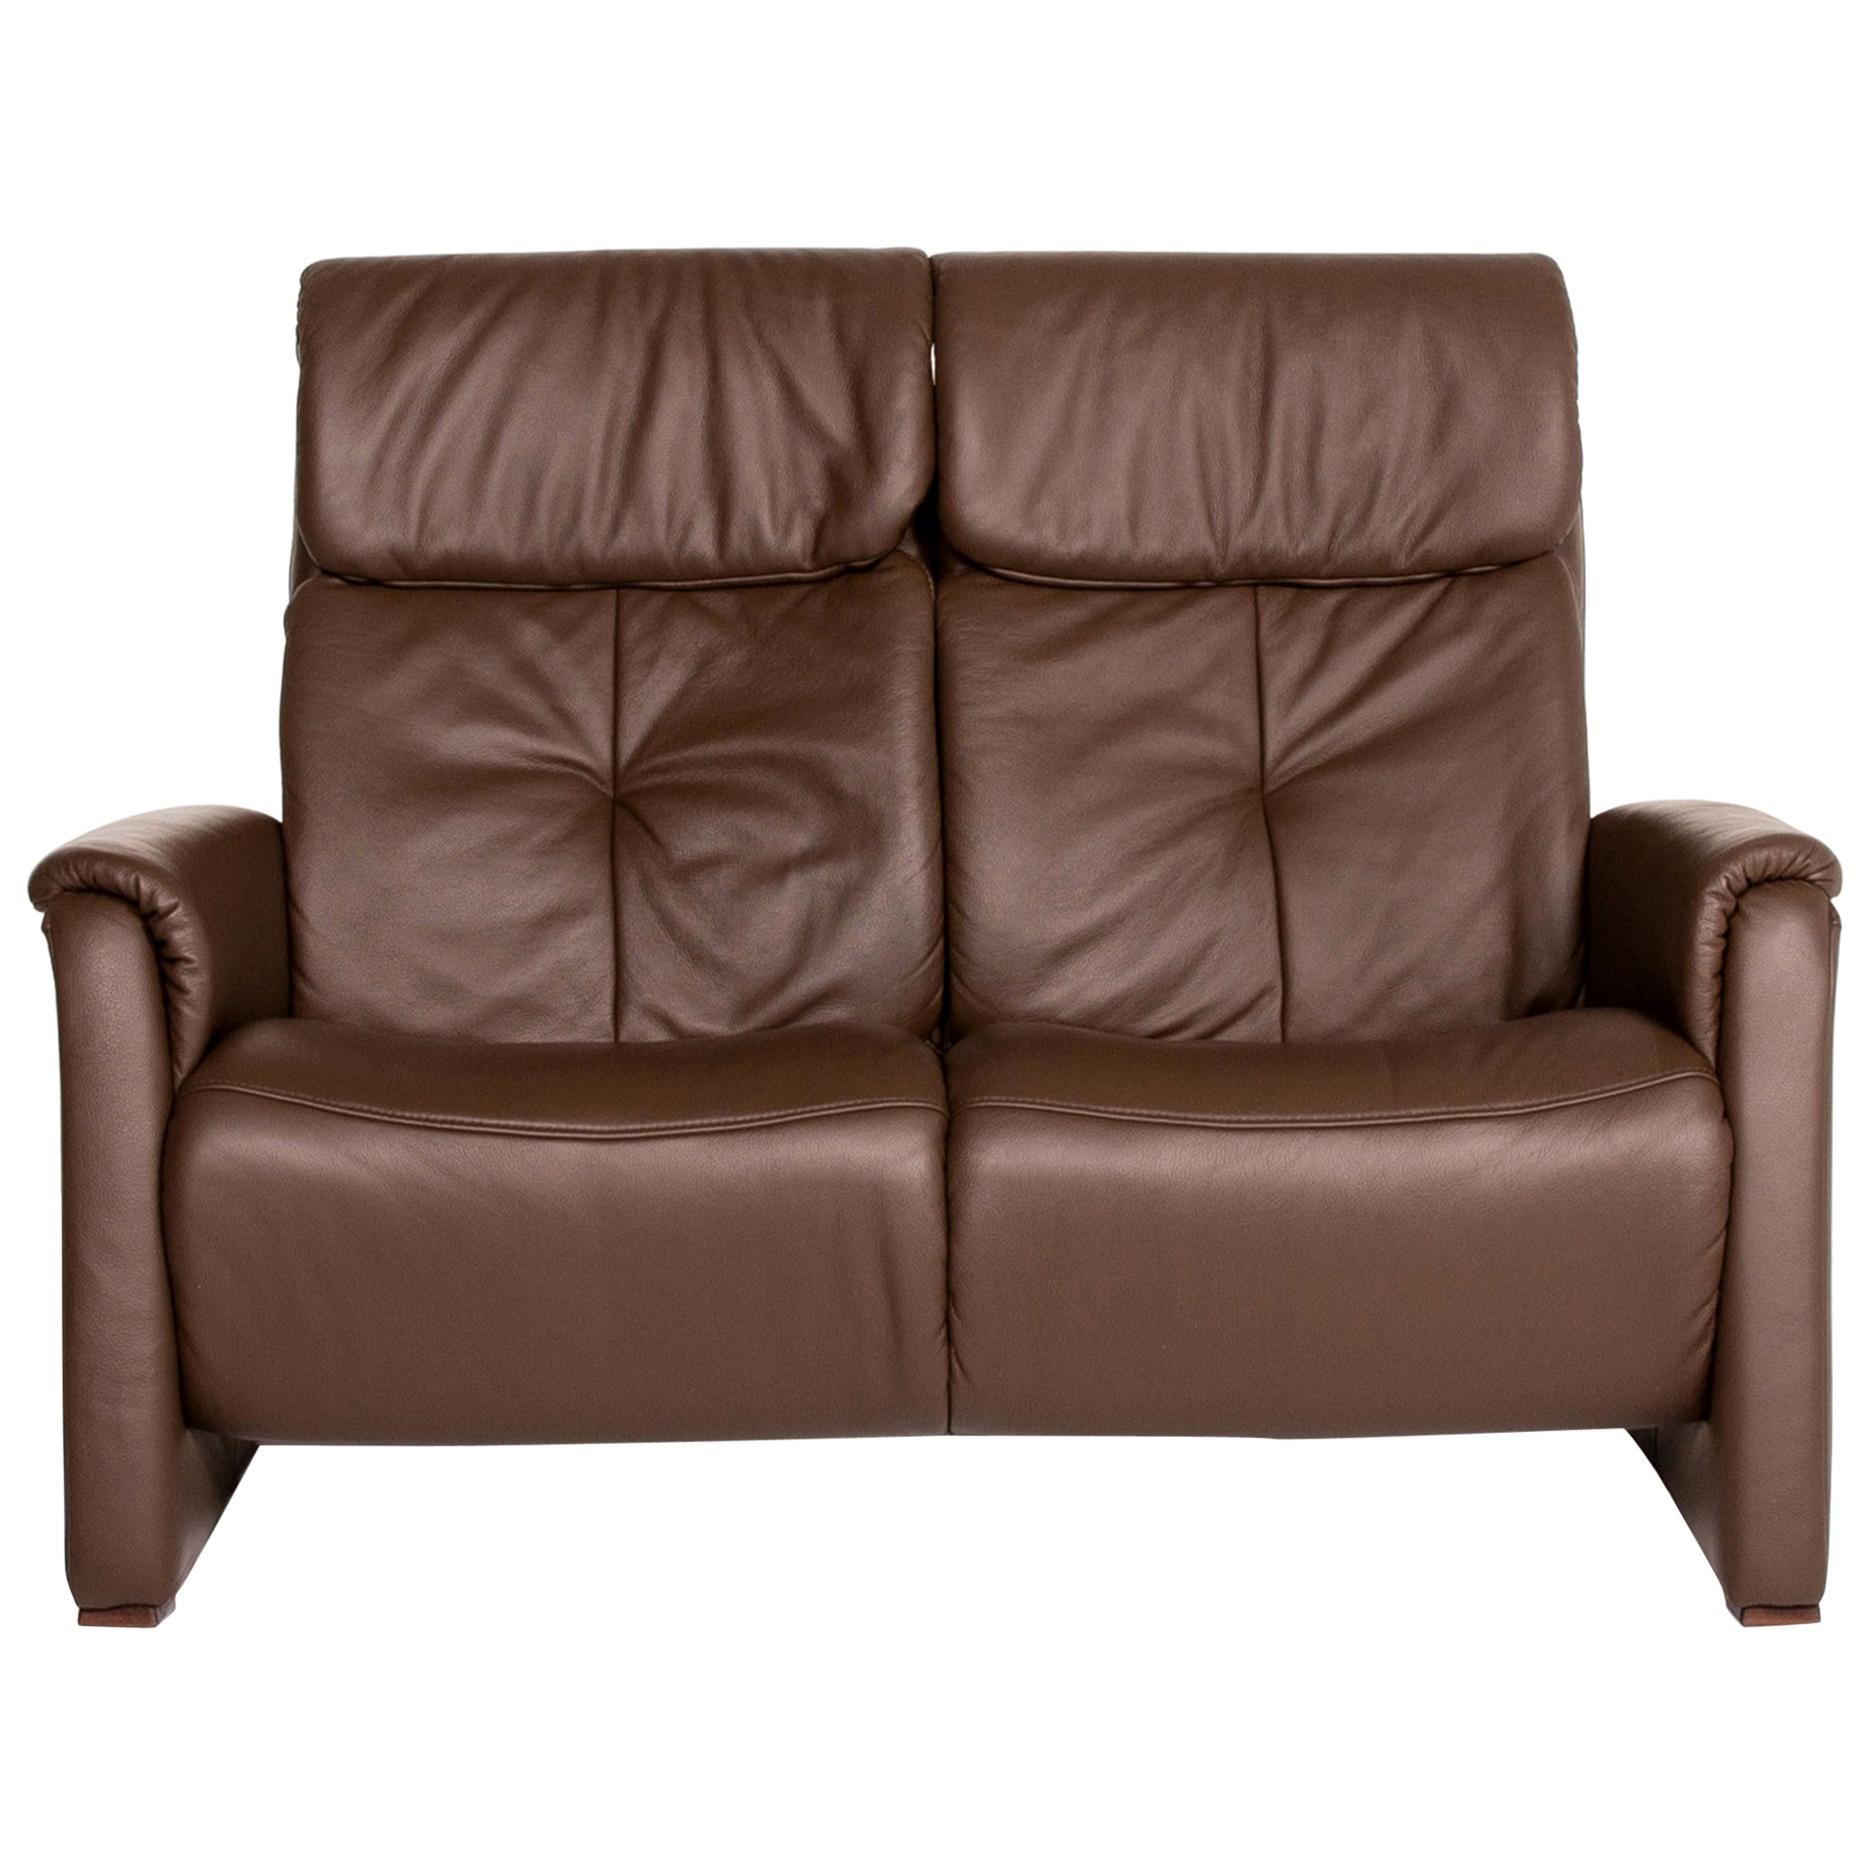 Himolla Leather Sofa Dark Brown Brown Two-Seat Function Relax Function Couch For Sale